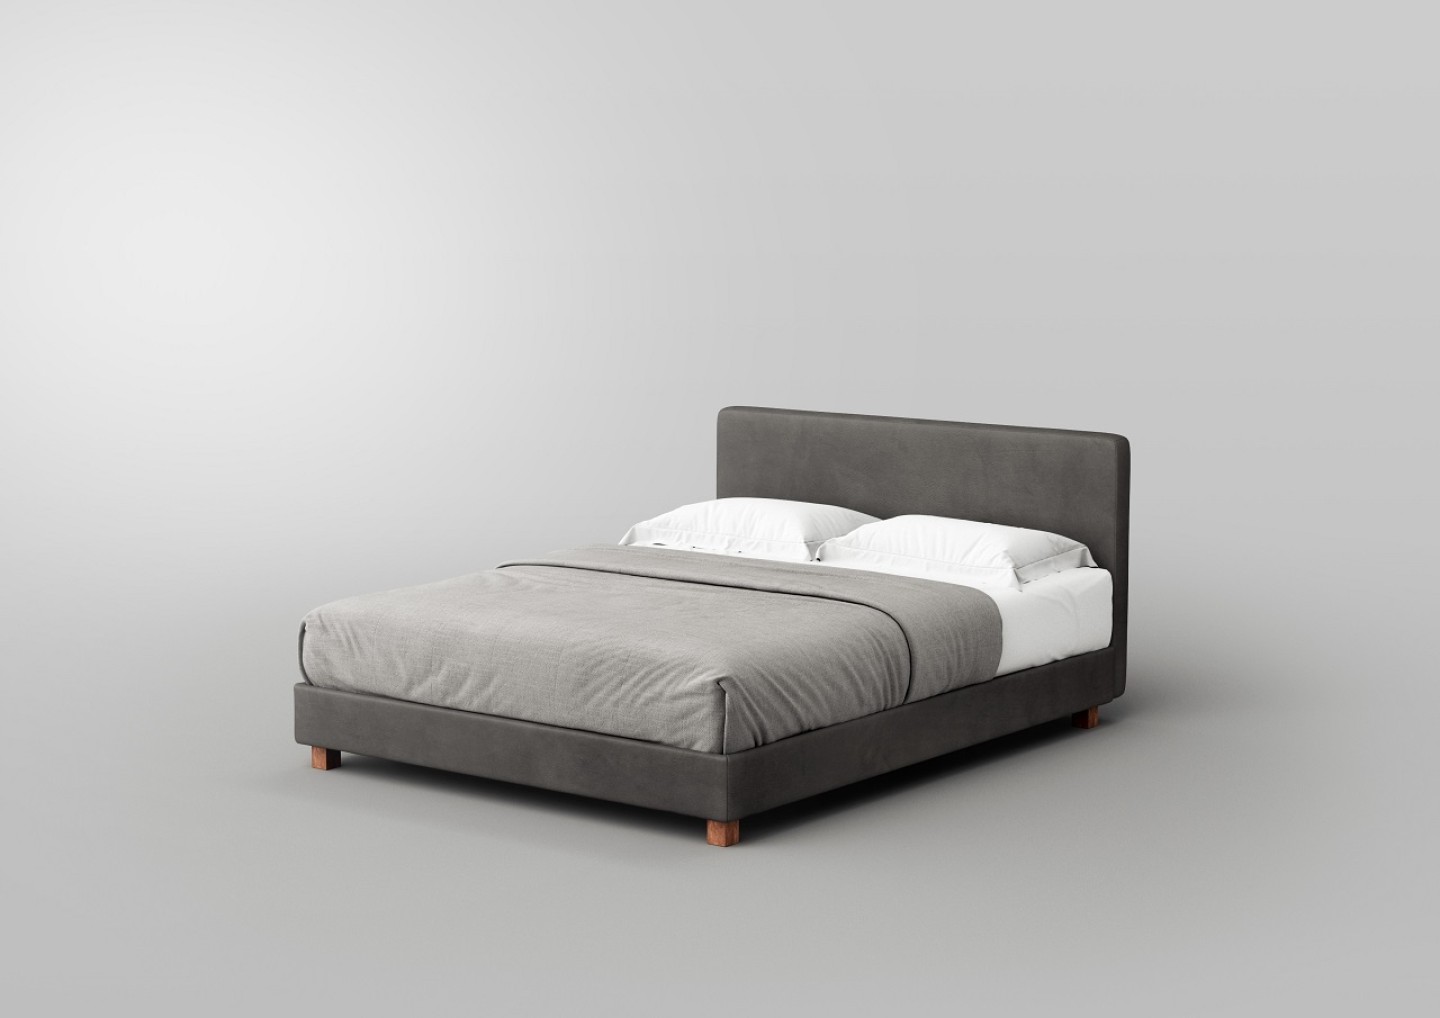 THE PLAY BED by Elite Strom